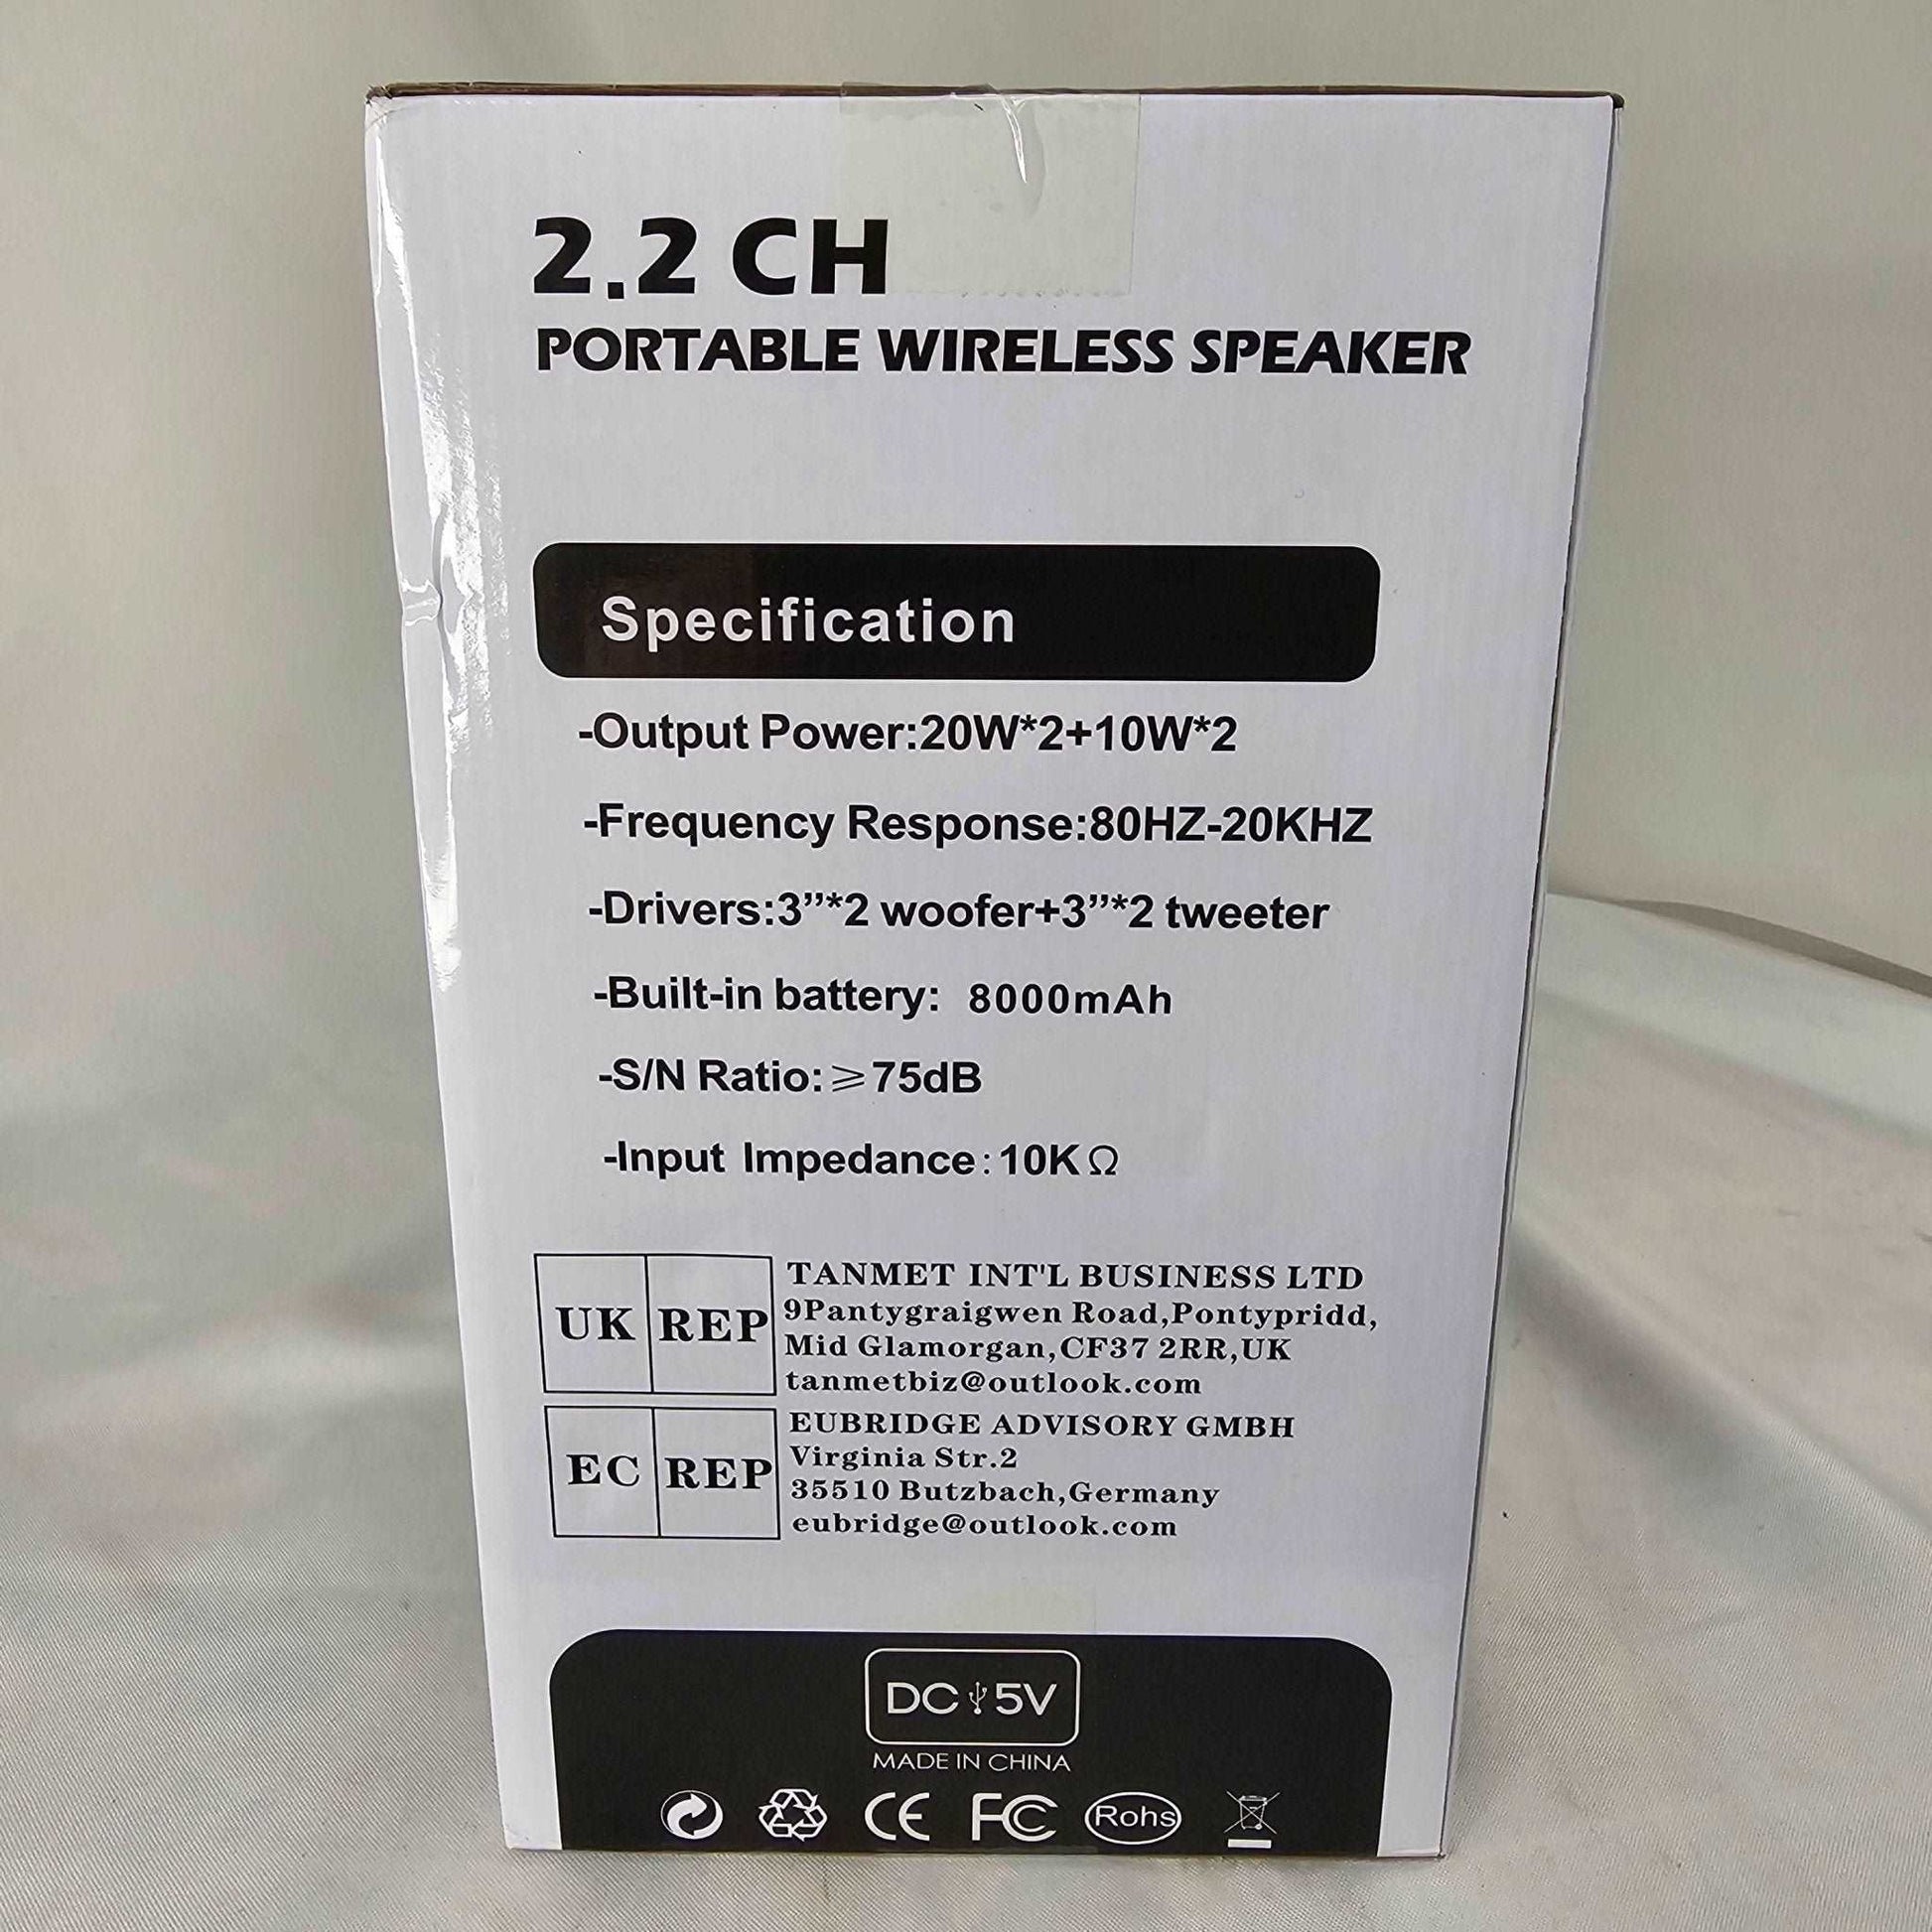 2.2 CH portable Wireless Speaker A21 - DQ Distribution